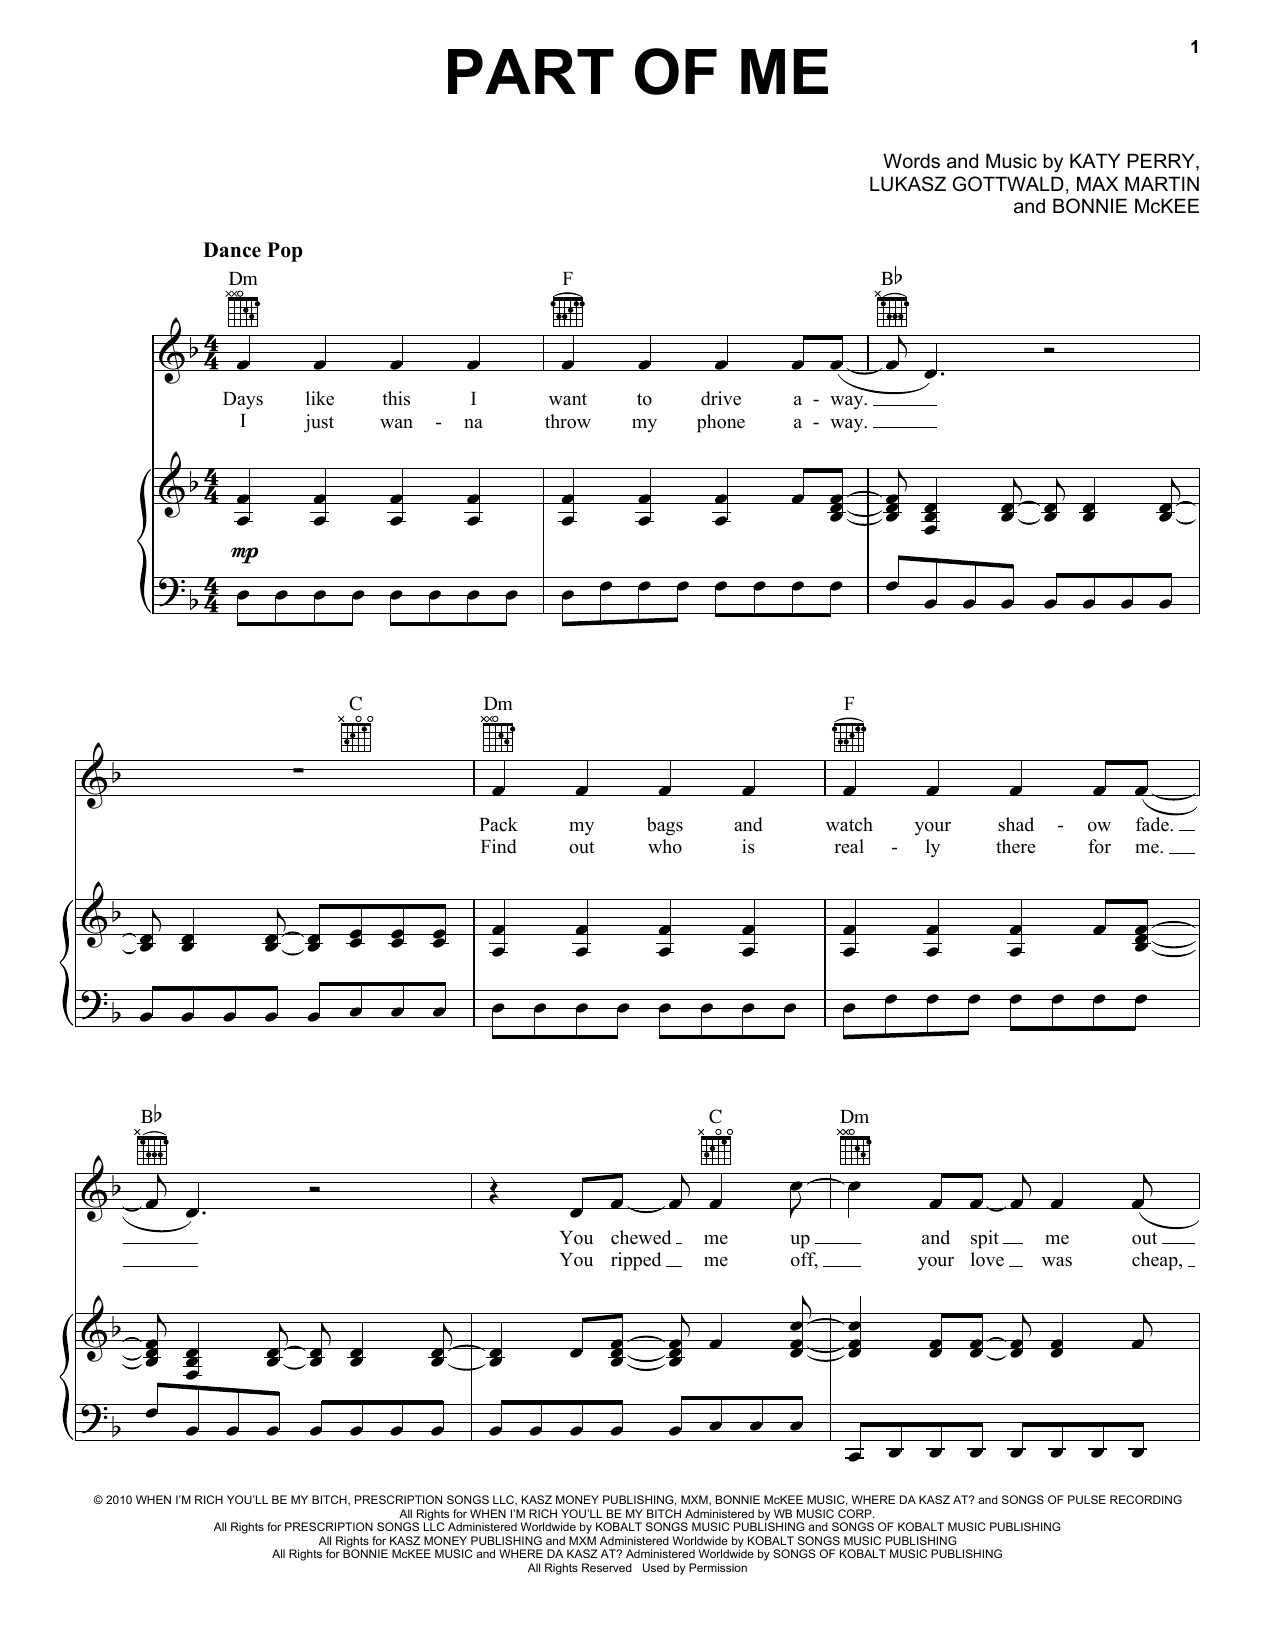 Download Katy Perry Part Of Me Sheet Music